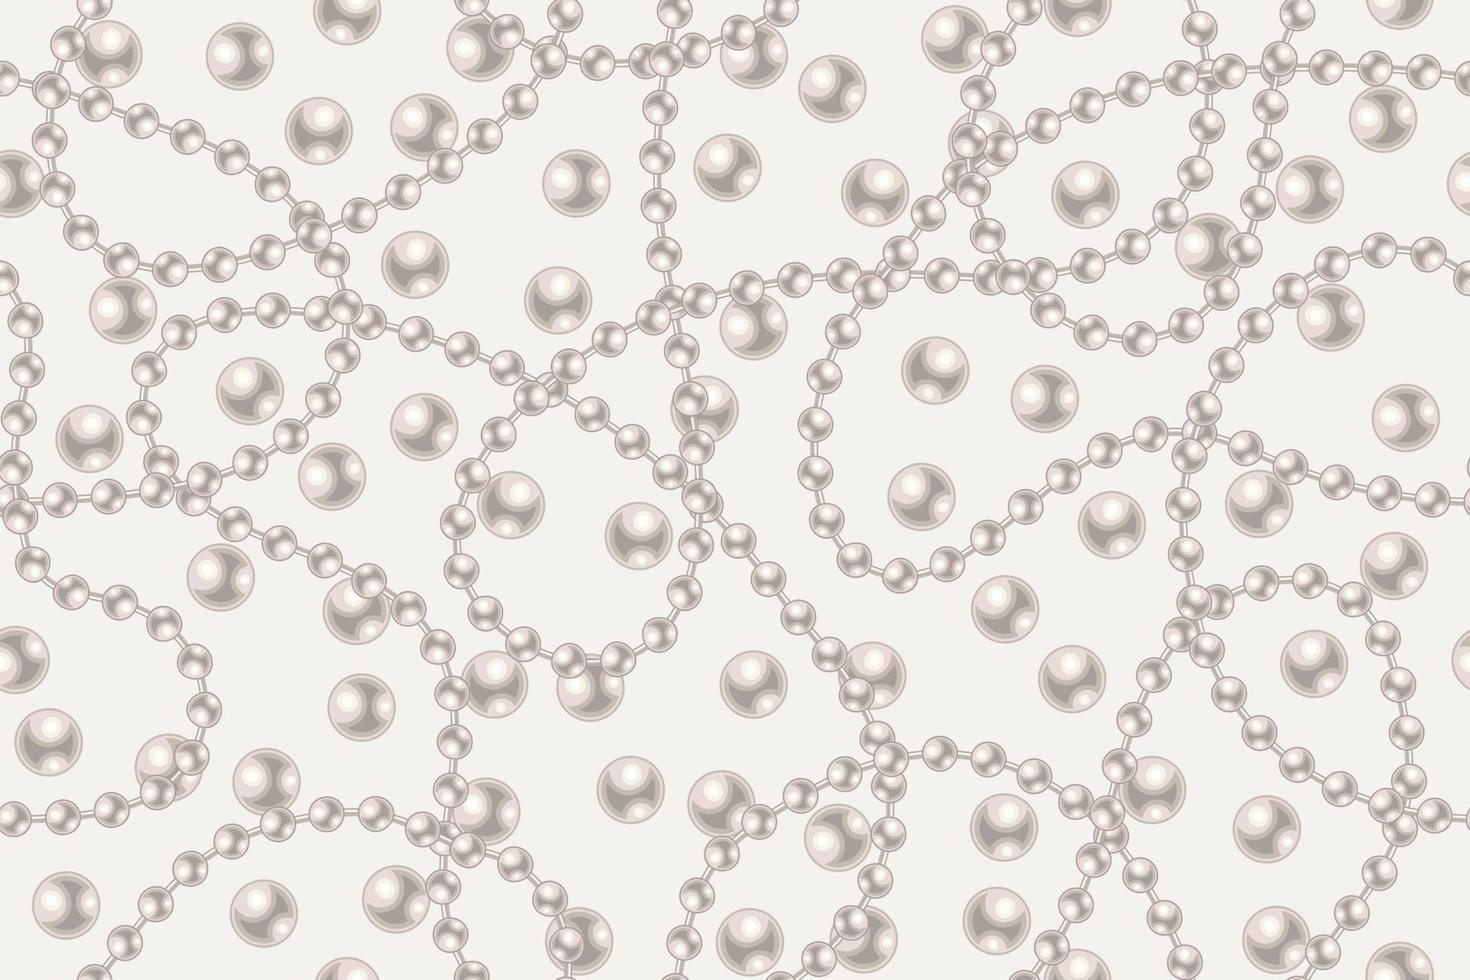 Seamless pattern with large white pearl beads, strings of pearls on light background. Wavy lines, classic pastel color of pearls. Vector illustration